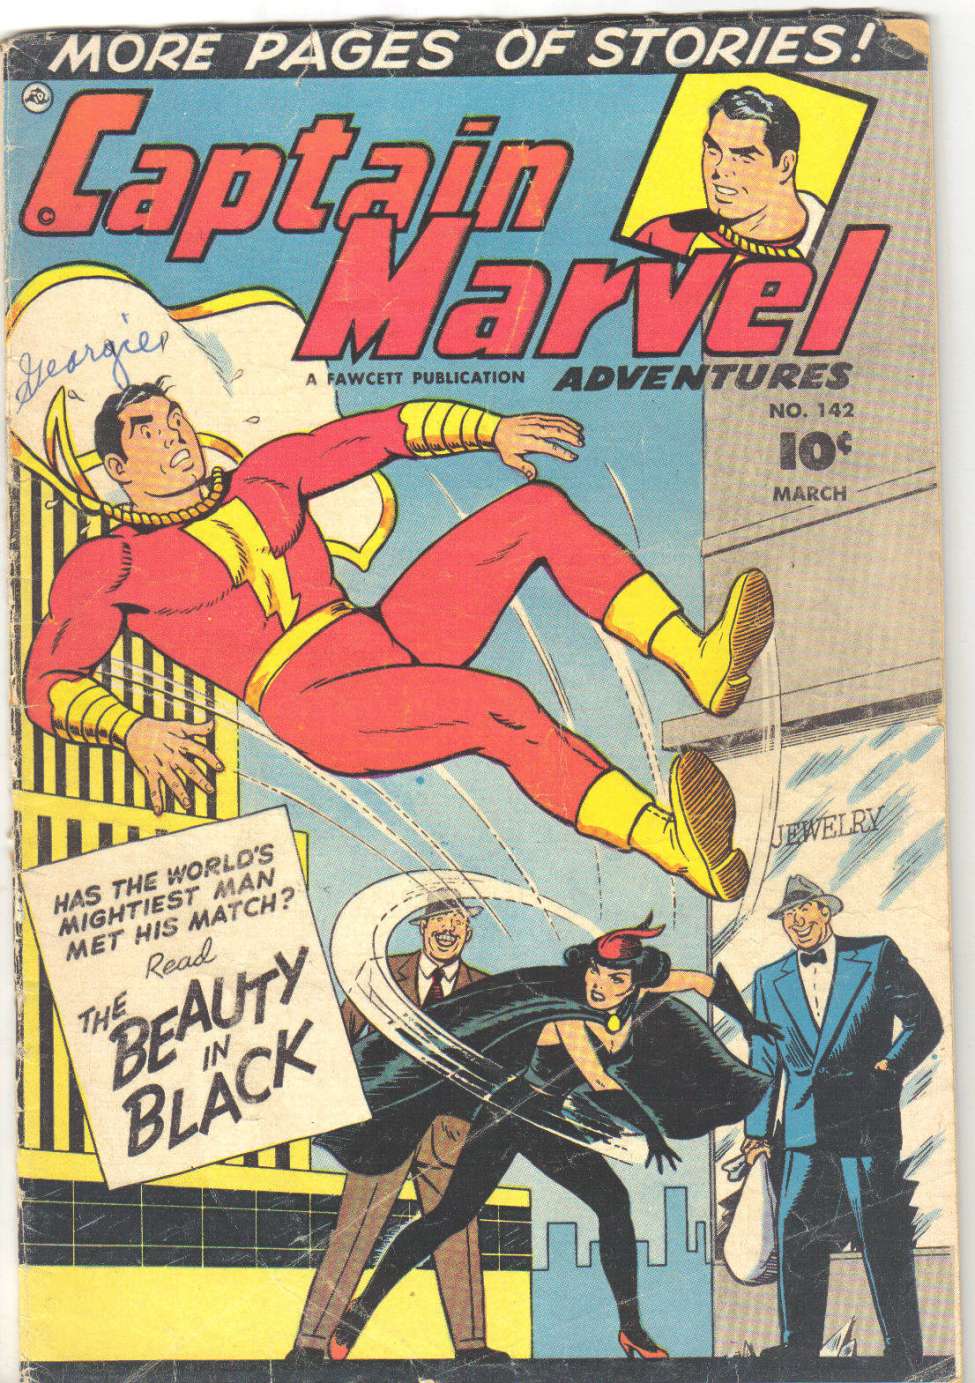 Book Cover For Captain Marvel Adventures 142